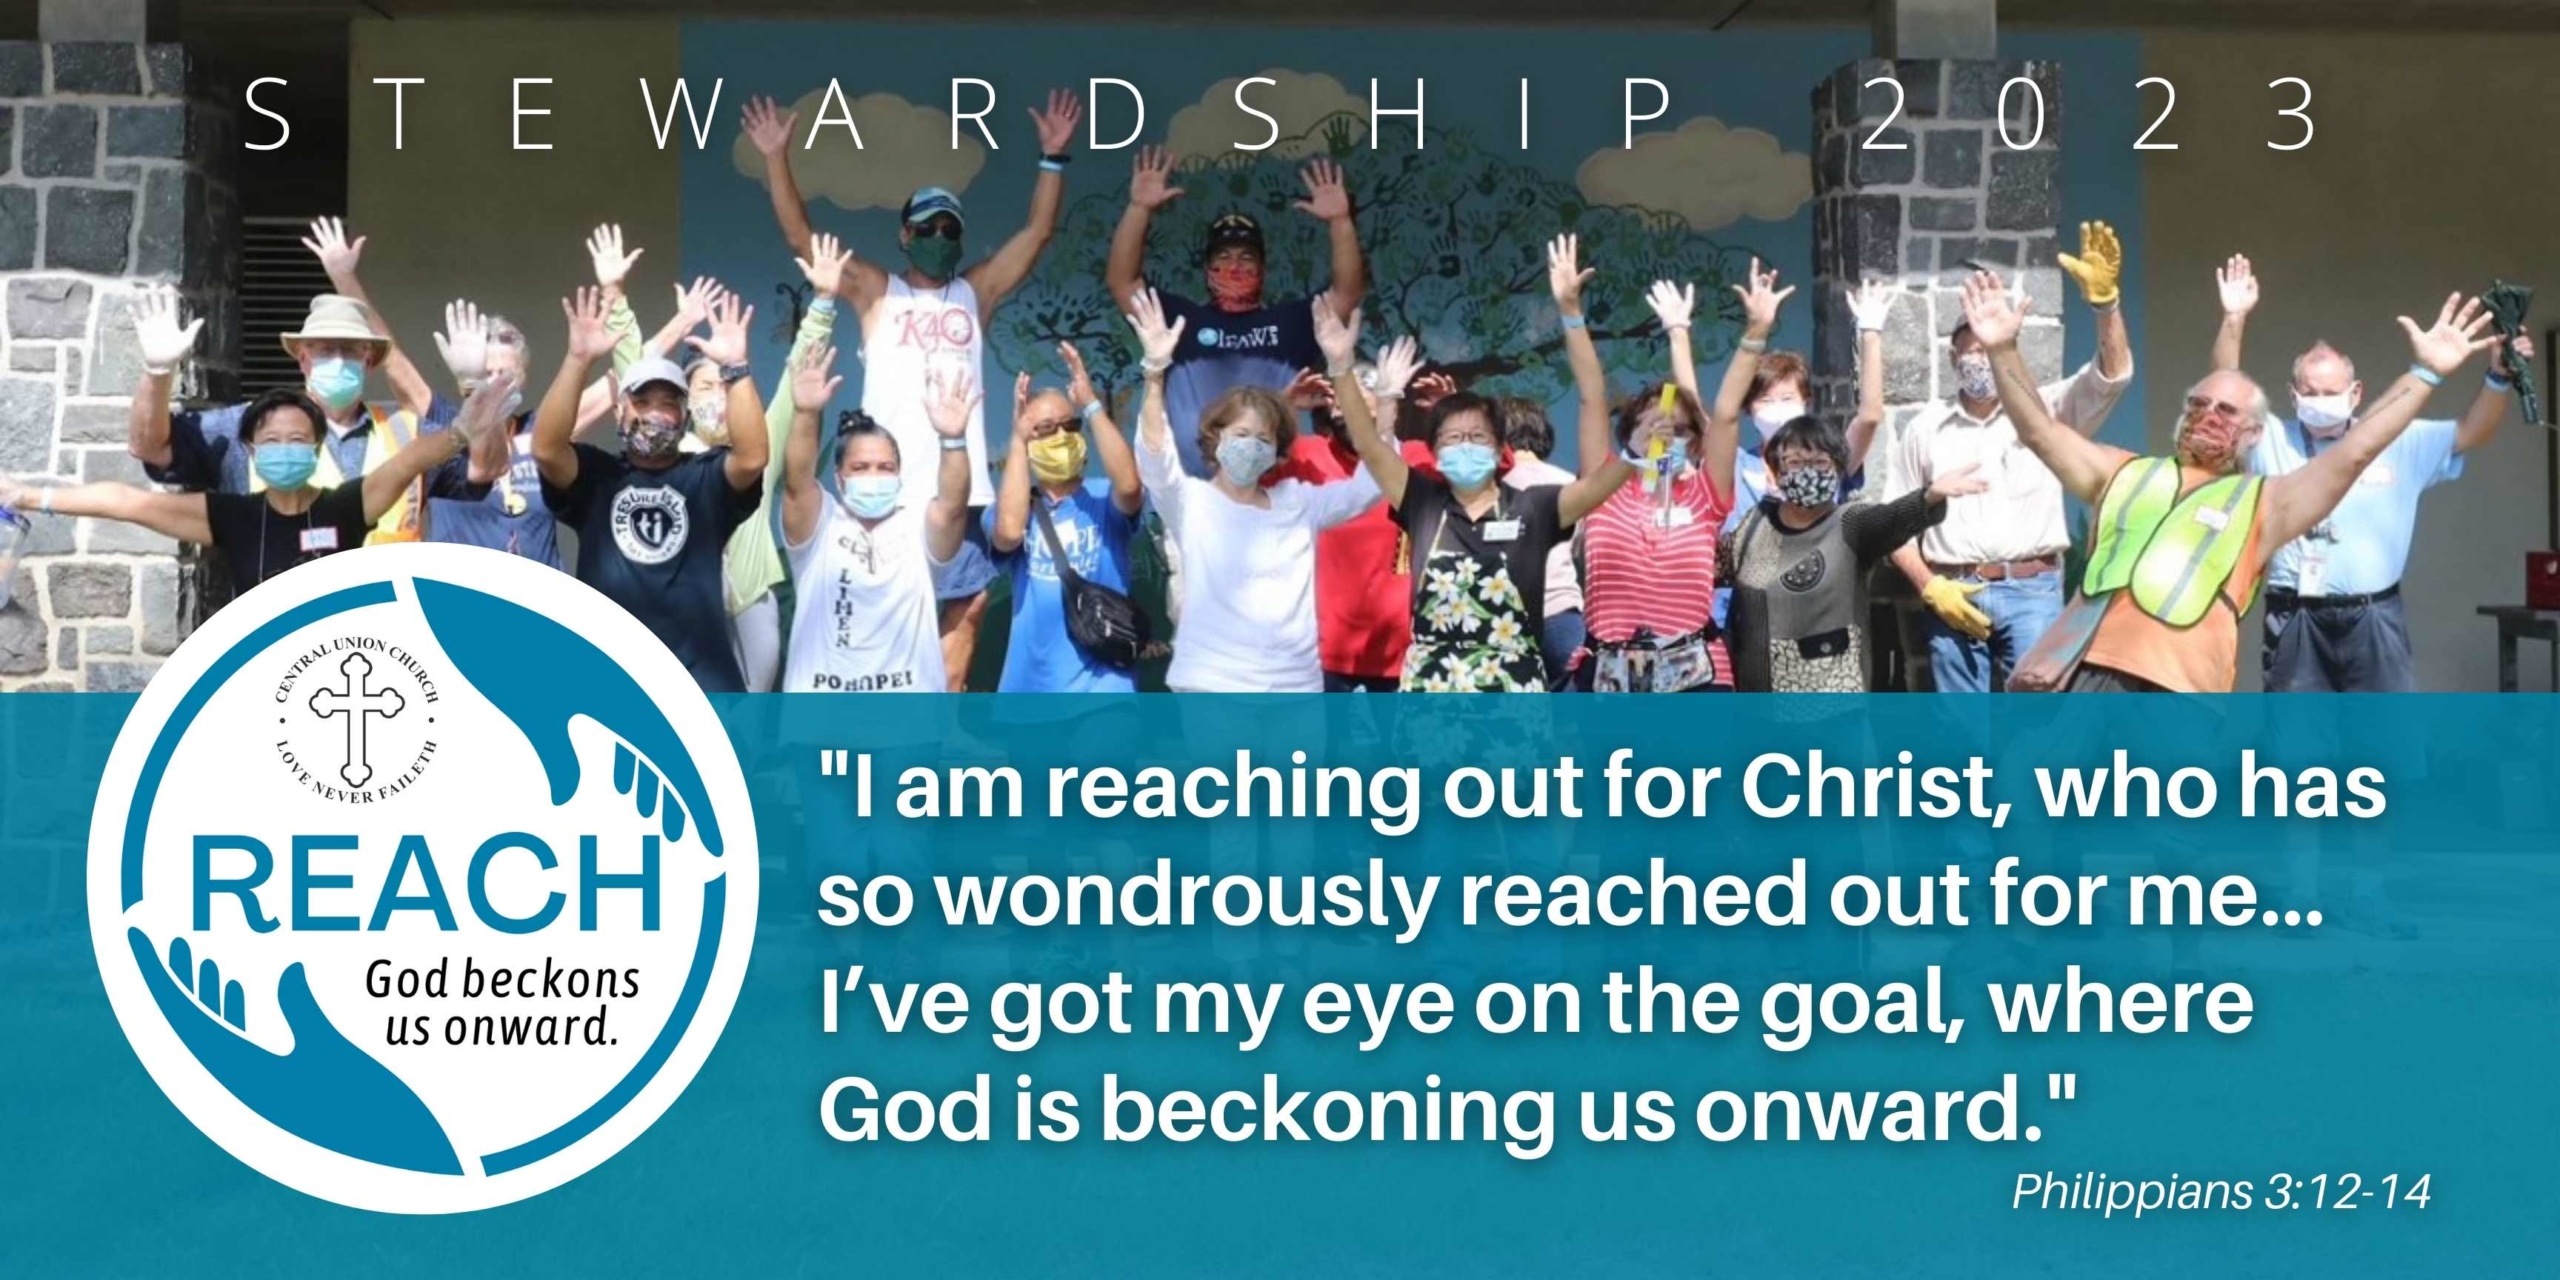 main background image is of volunteers raising their arms in the air. bottom half of graphic is blue box with text that reads I am reaching out for Christ, who has so wondrously reached out for me... I’ve got my eye on the goal, where God is beckoning us onward from Philippians 3:12-14. REACH circle logo in bottom left corner